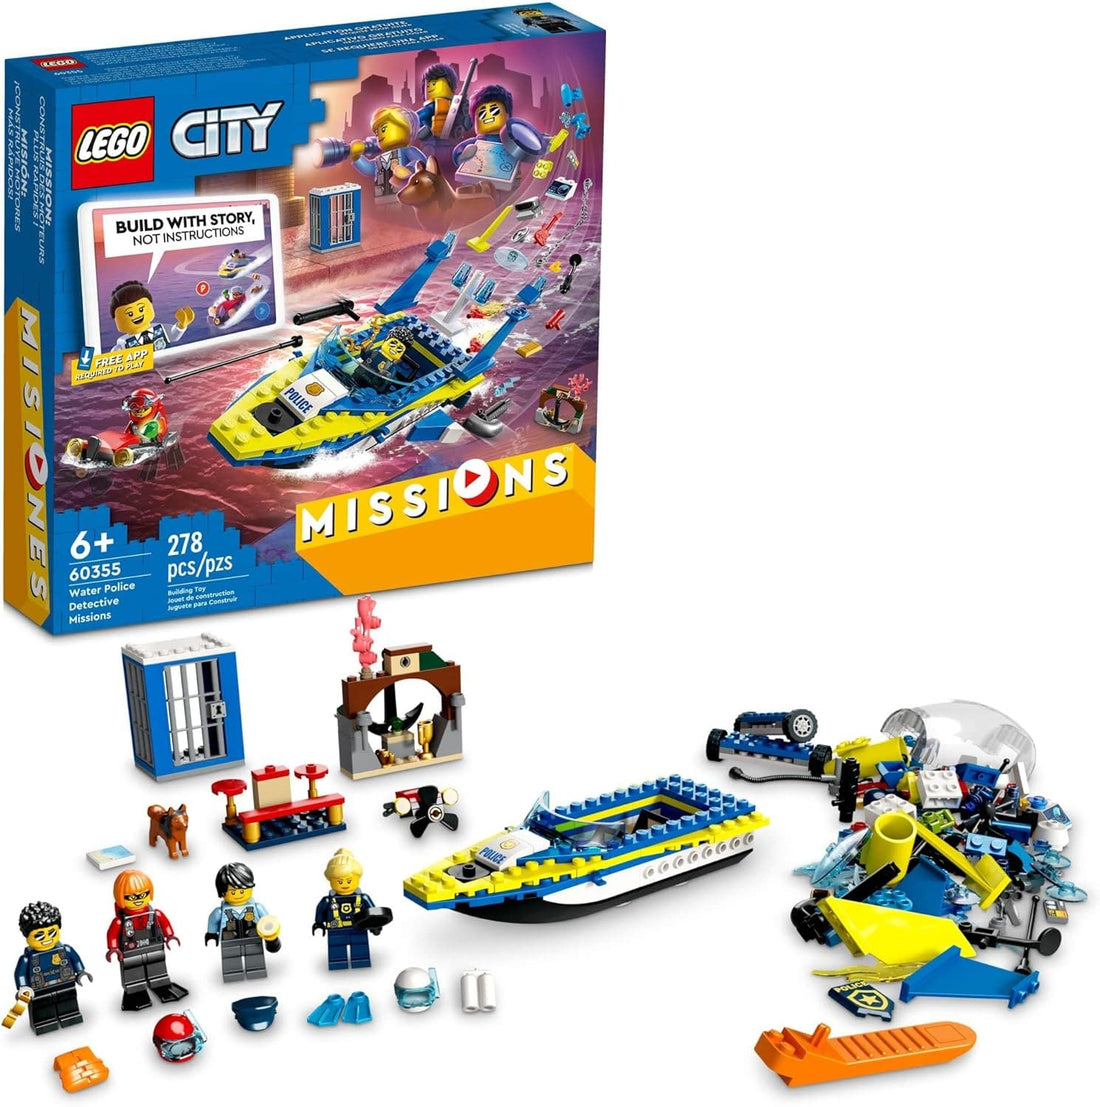 LEGO City Water Police Detective Missions, Interactive Digital Building - best price from Maltashopper.com 60355